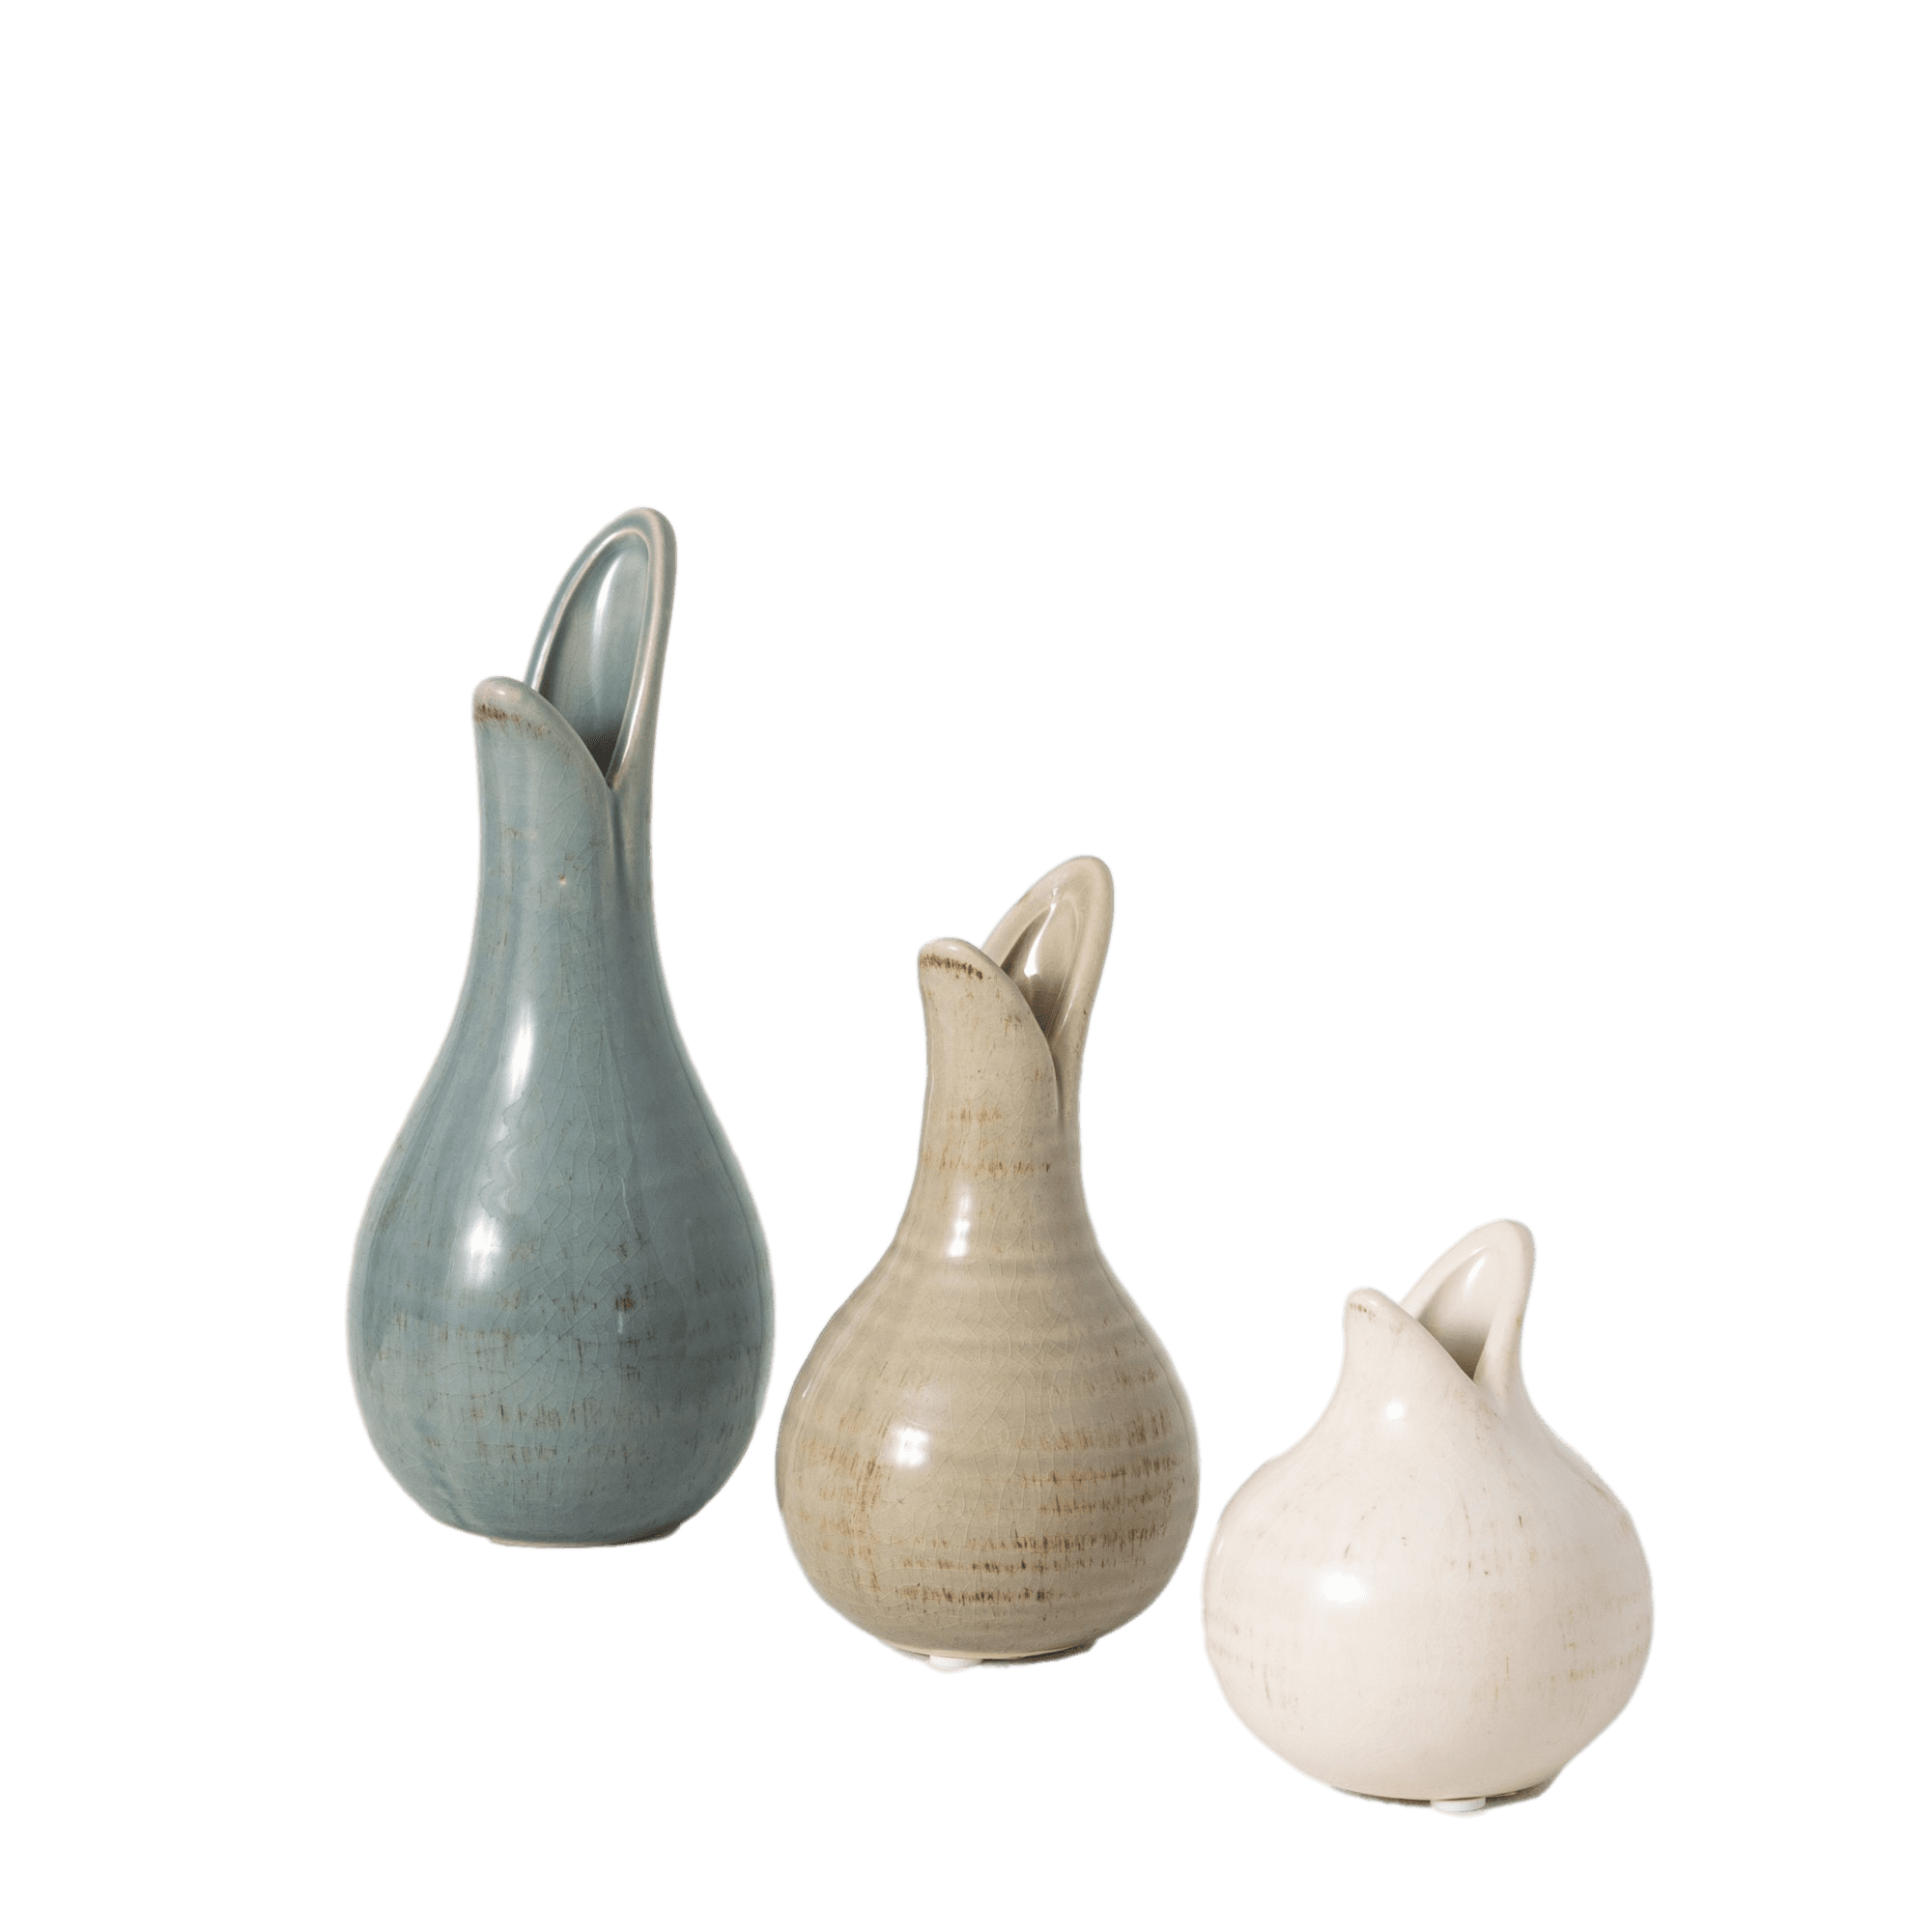 Rustic Home Decor Distressed White Set of 3 Vases Ceramic Details about   Small White Vase Set 